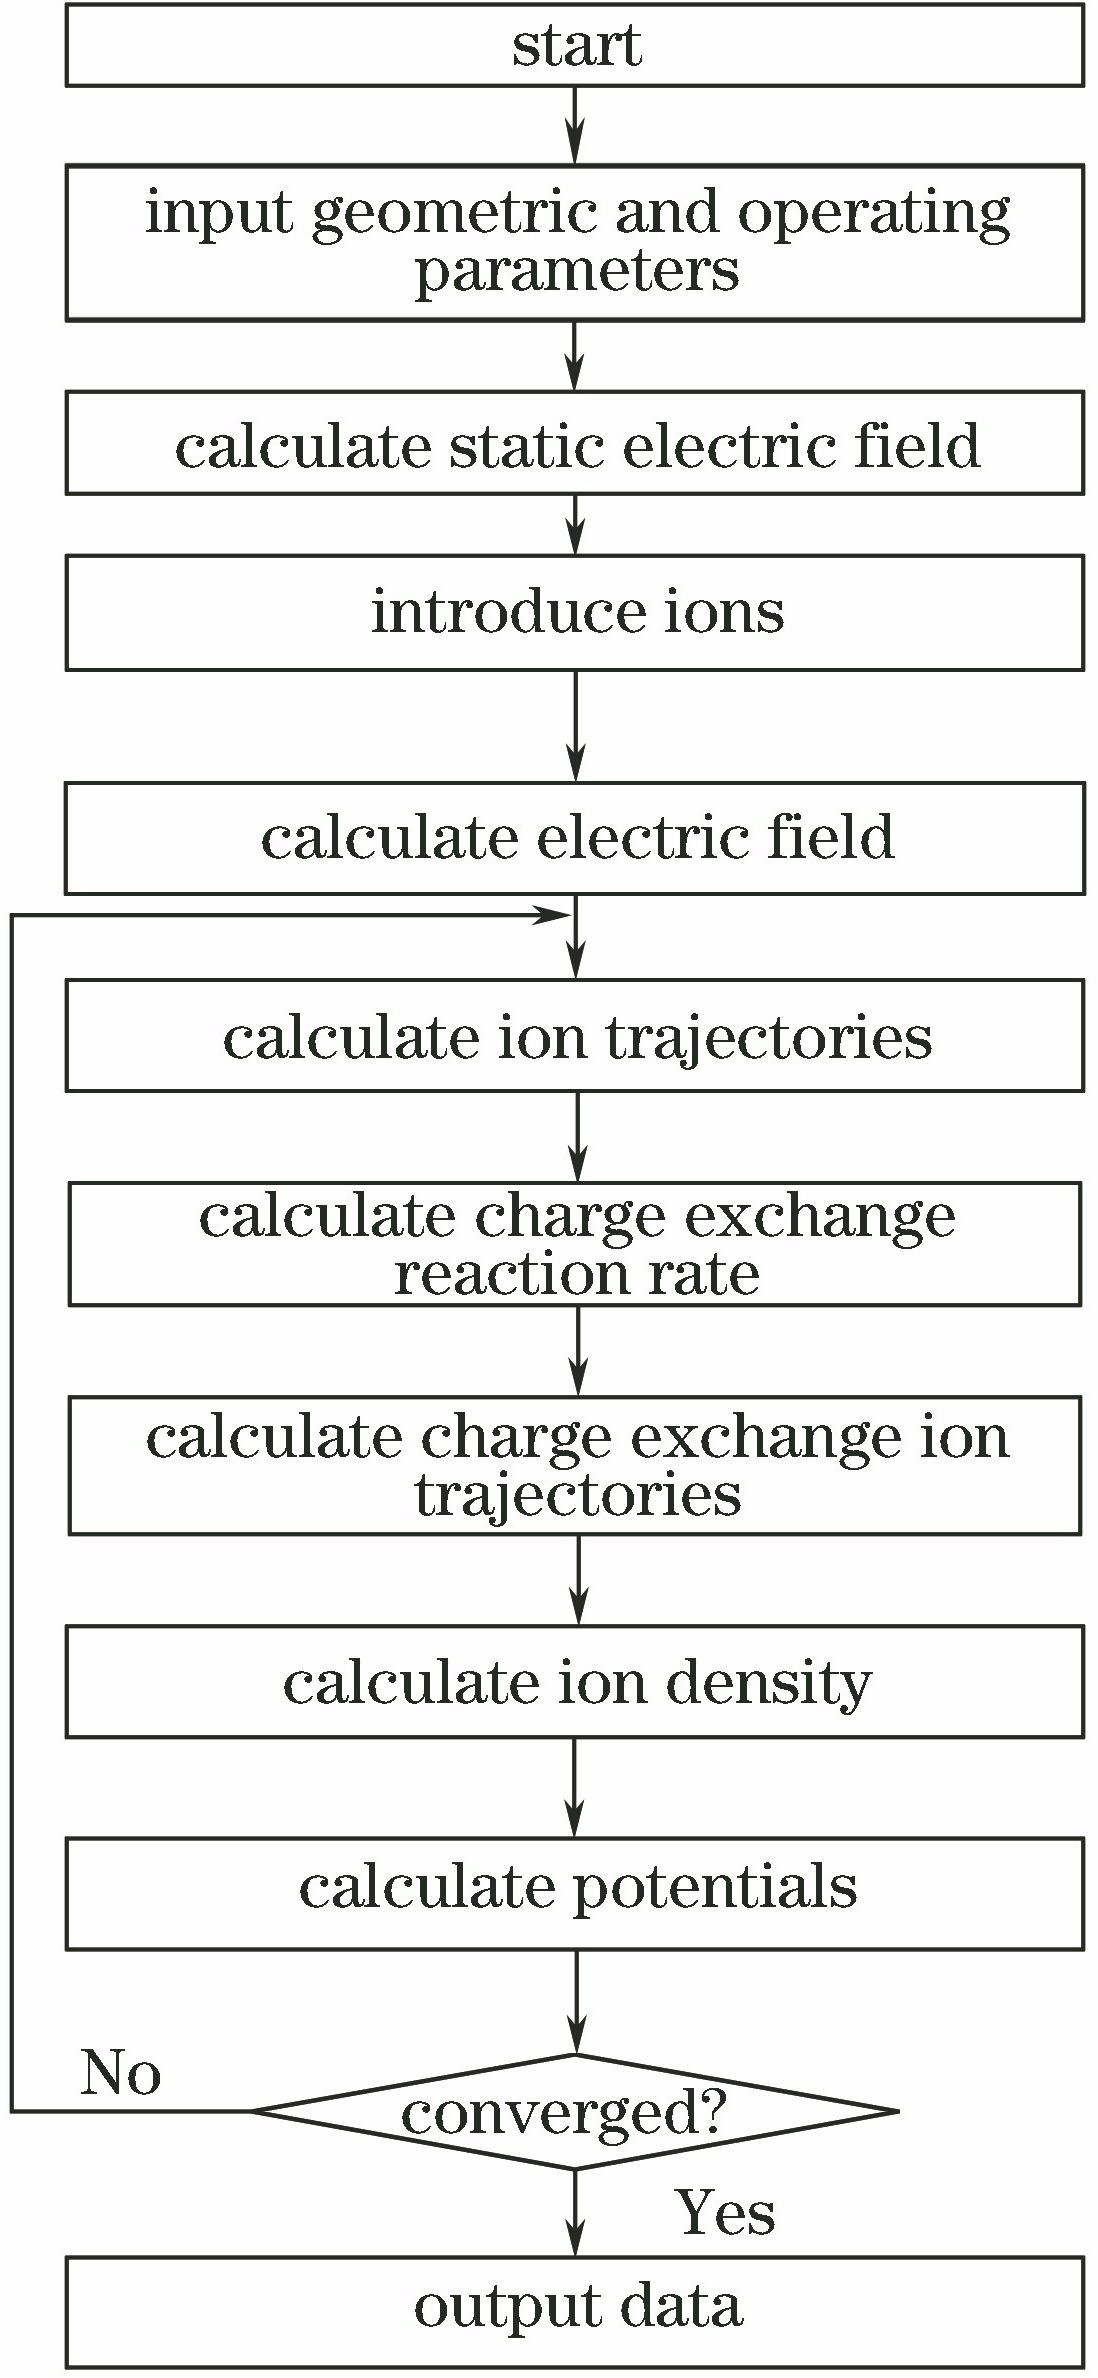 Flow chart of simulation calculation